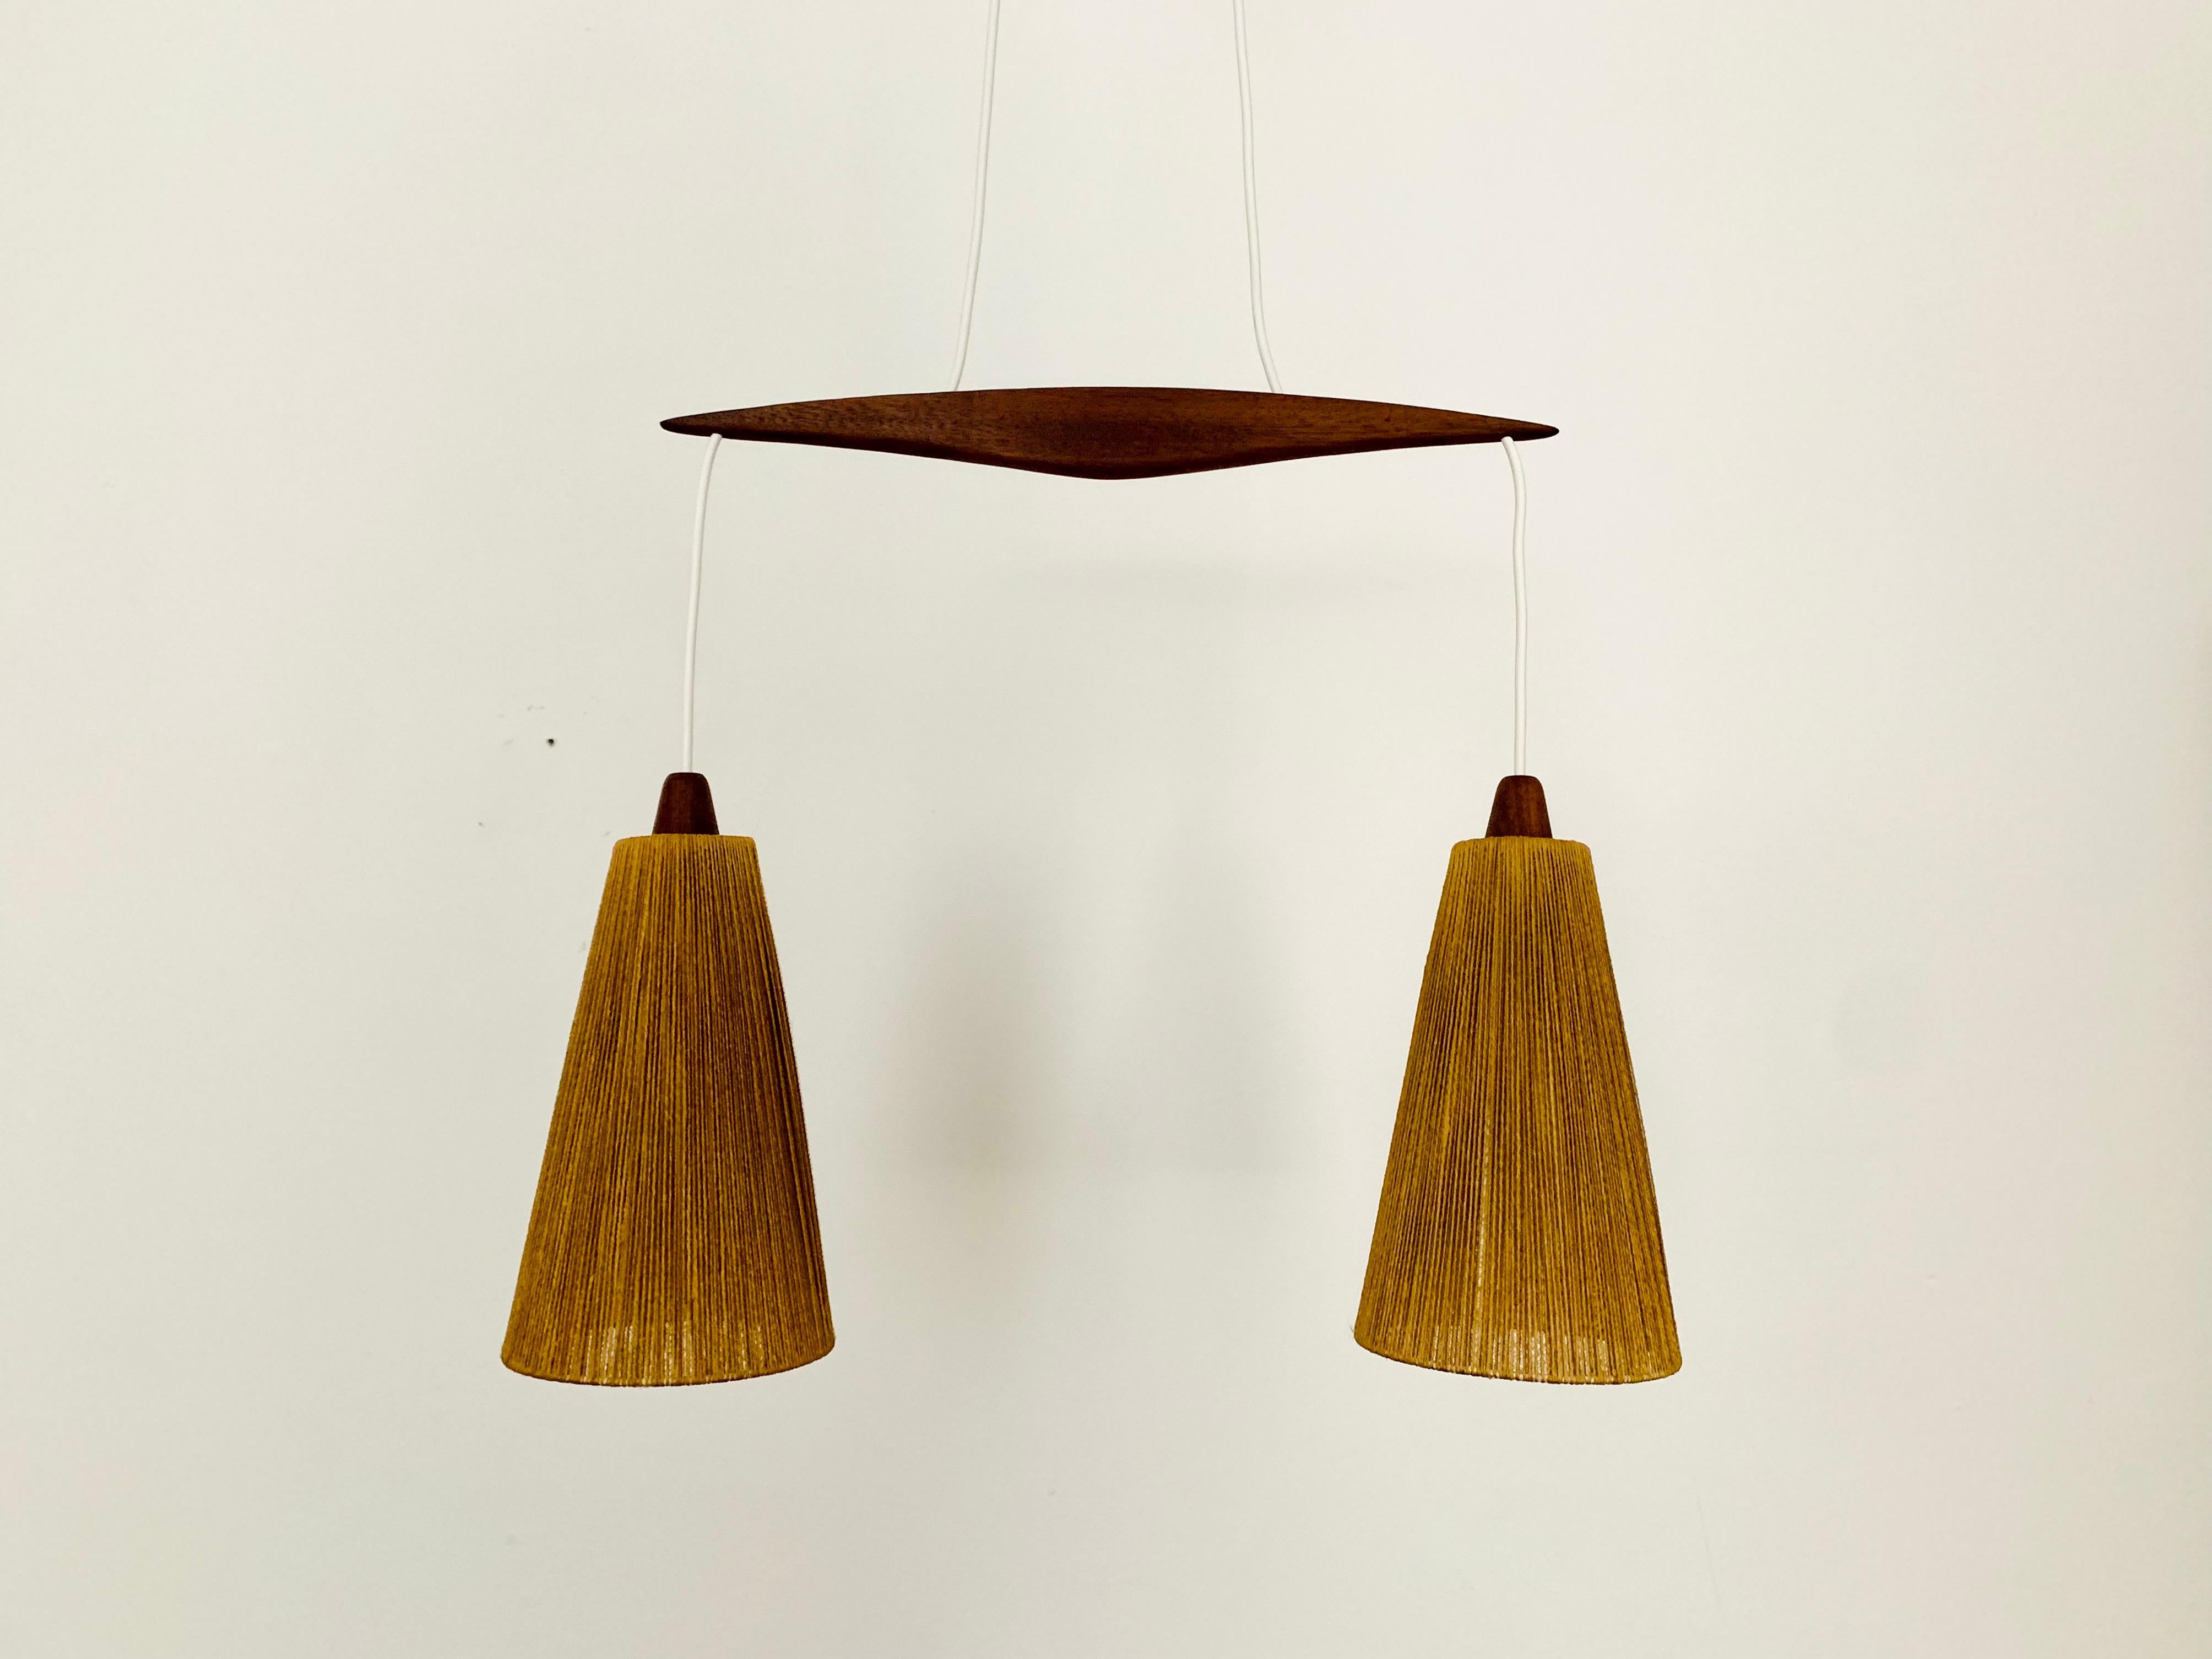 Beautiful sisal cascade lamp from the 1960s.
Great and unusual design with a fantastically comfortable look.
Very nice teak details and high-quality workmanship.
A spectacular play of light is created.

Manufacturer: Temde

Condition:

Very good